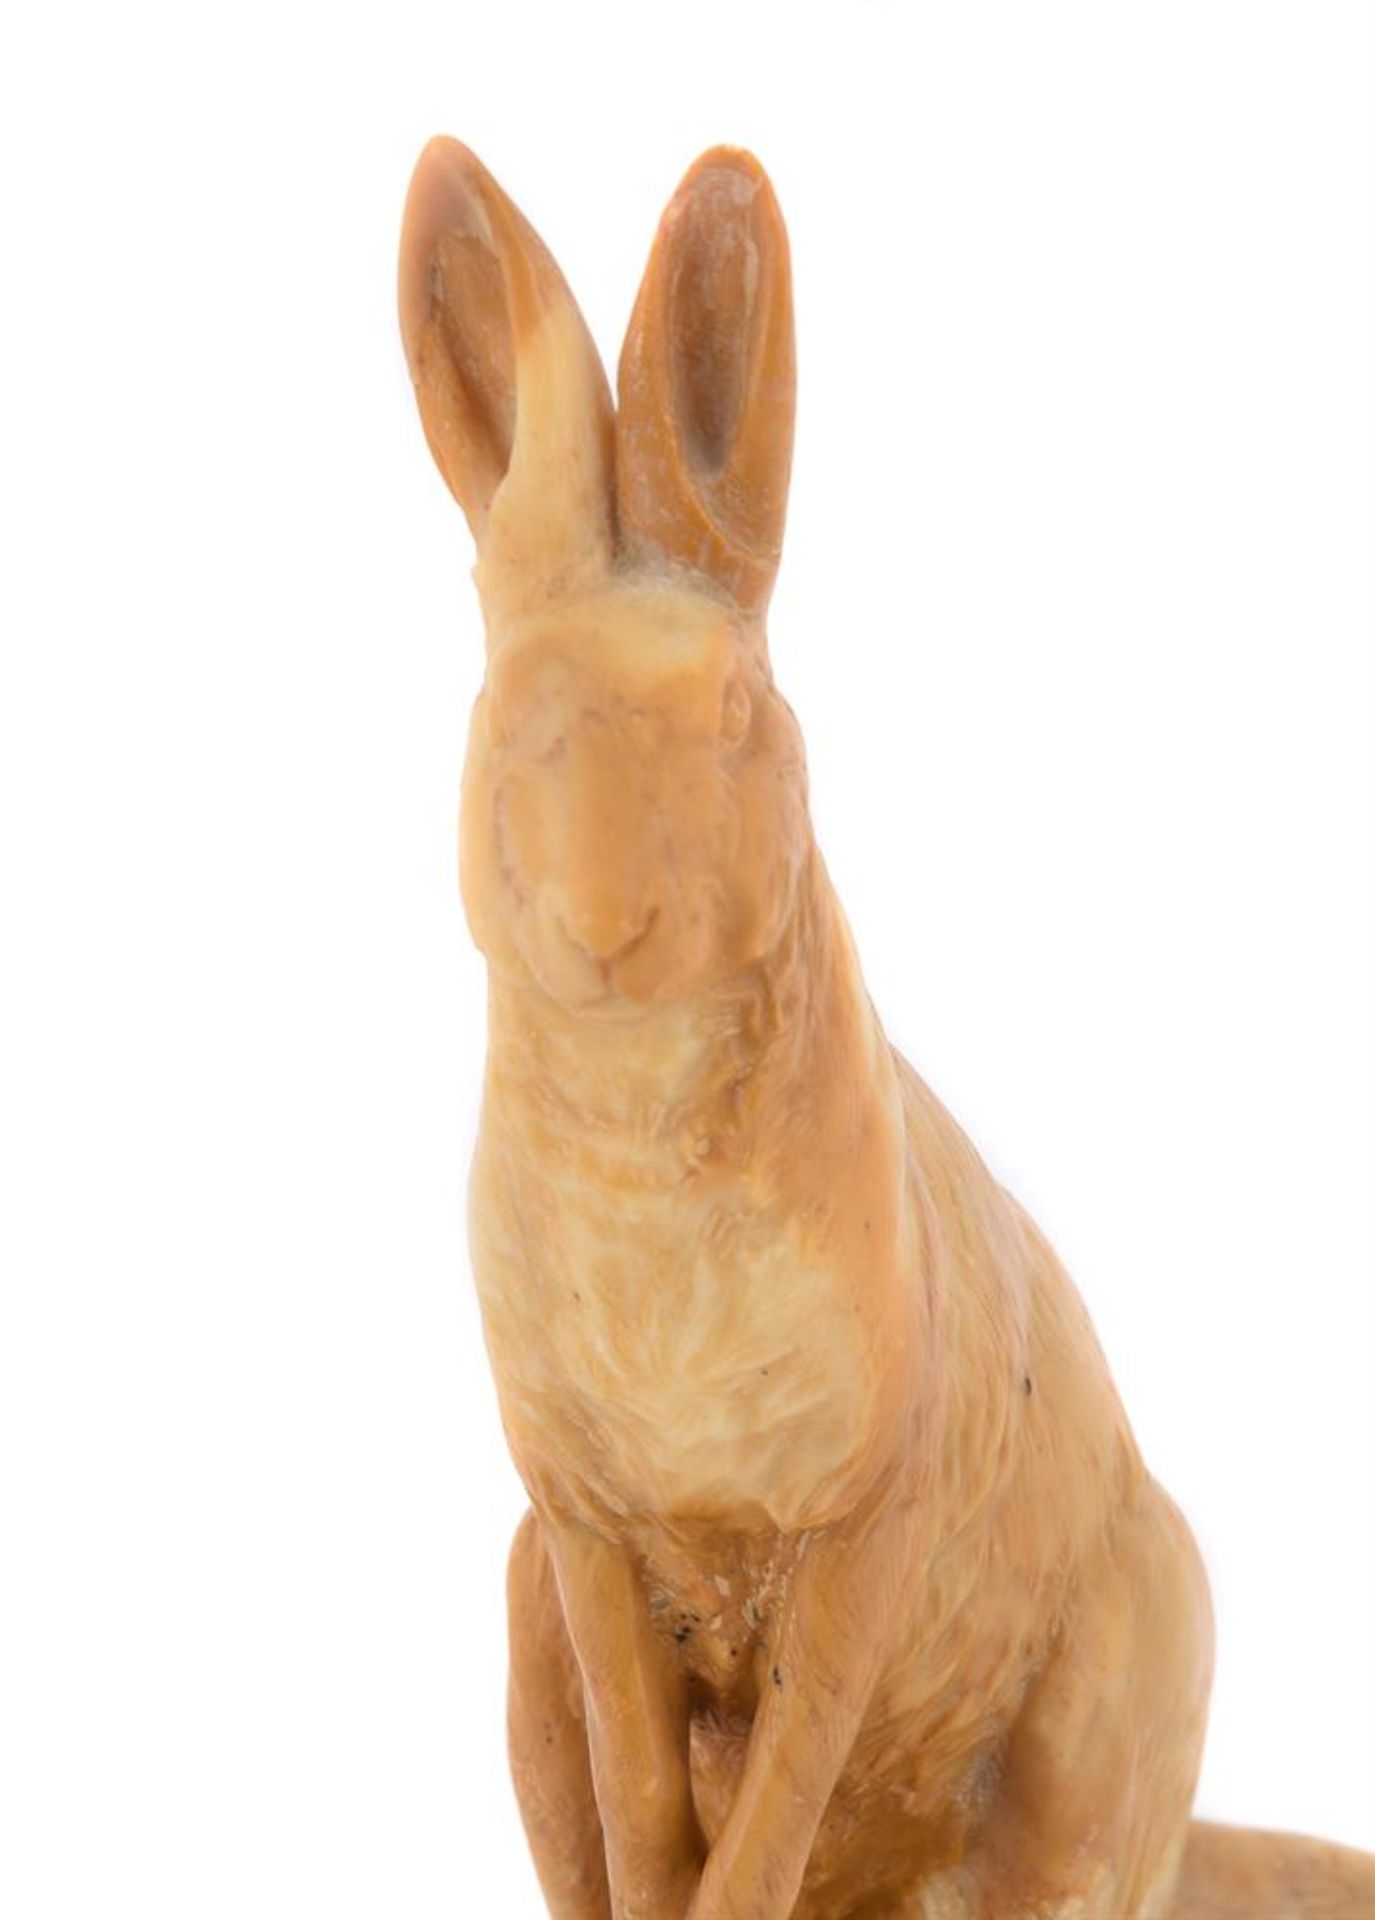 GEORGES GARDET (FRENCH, 1863-1939), A CARVED SIENA MARBLE MODEL OF A SEATED HARE - Image 4 of 5